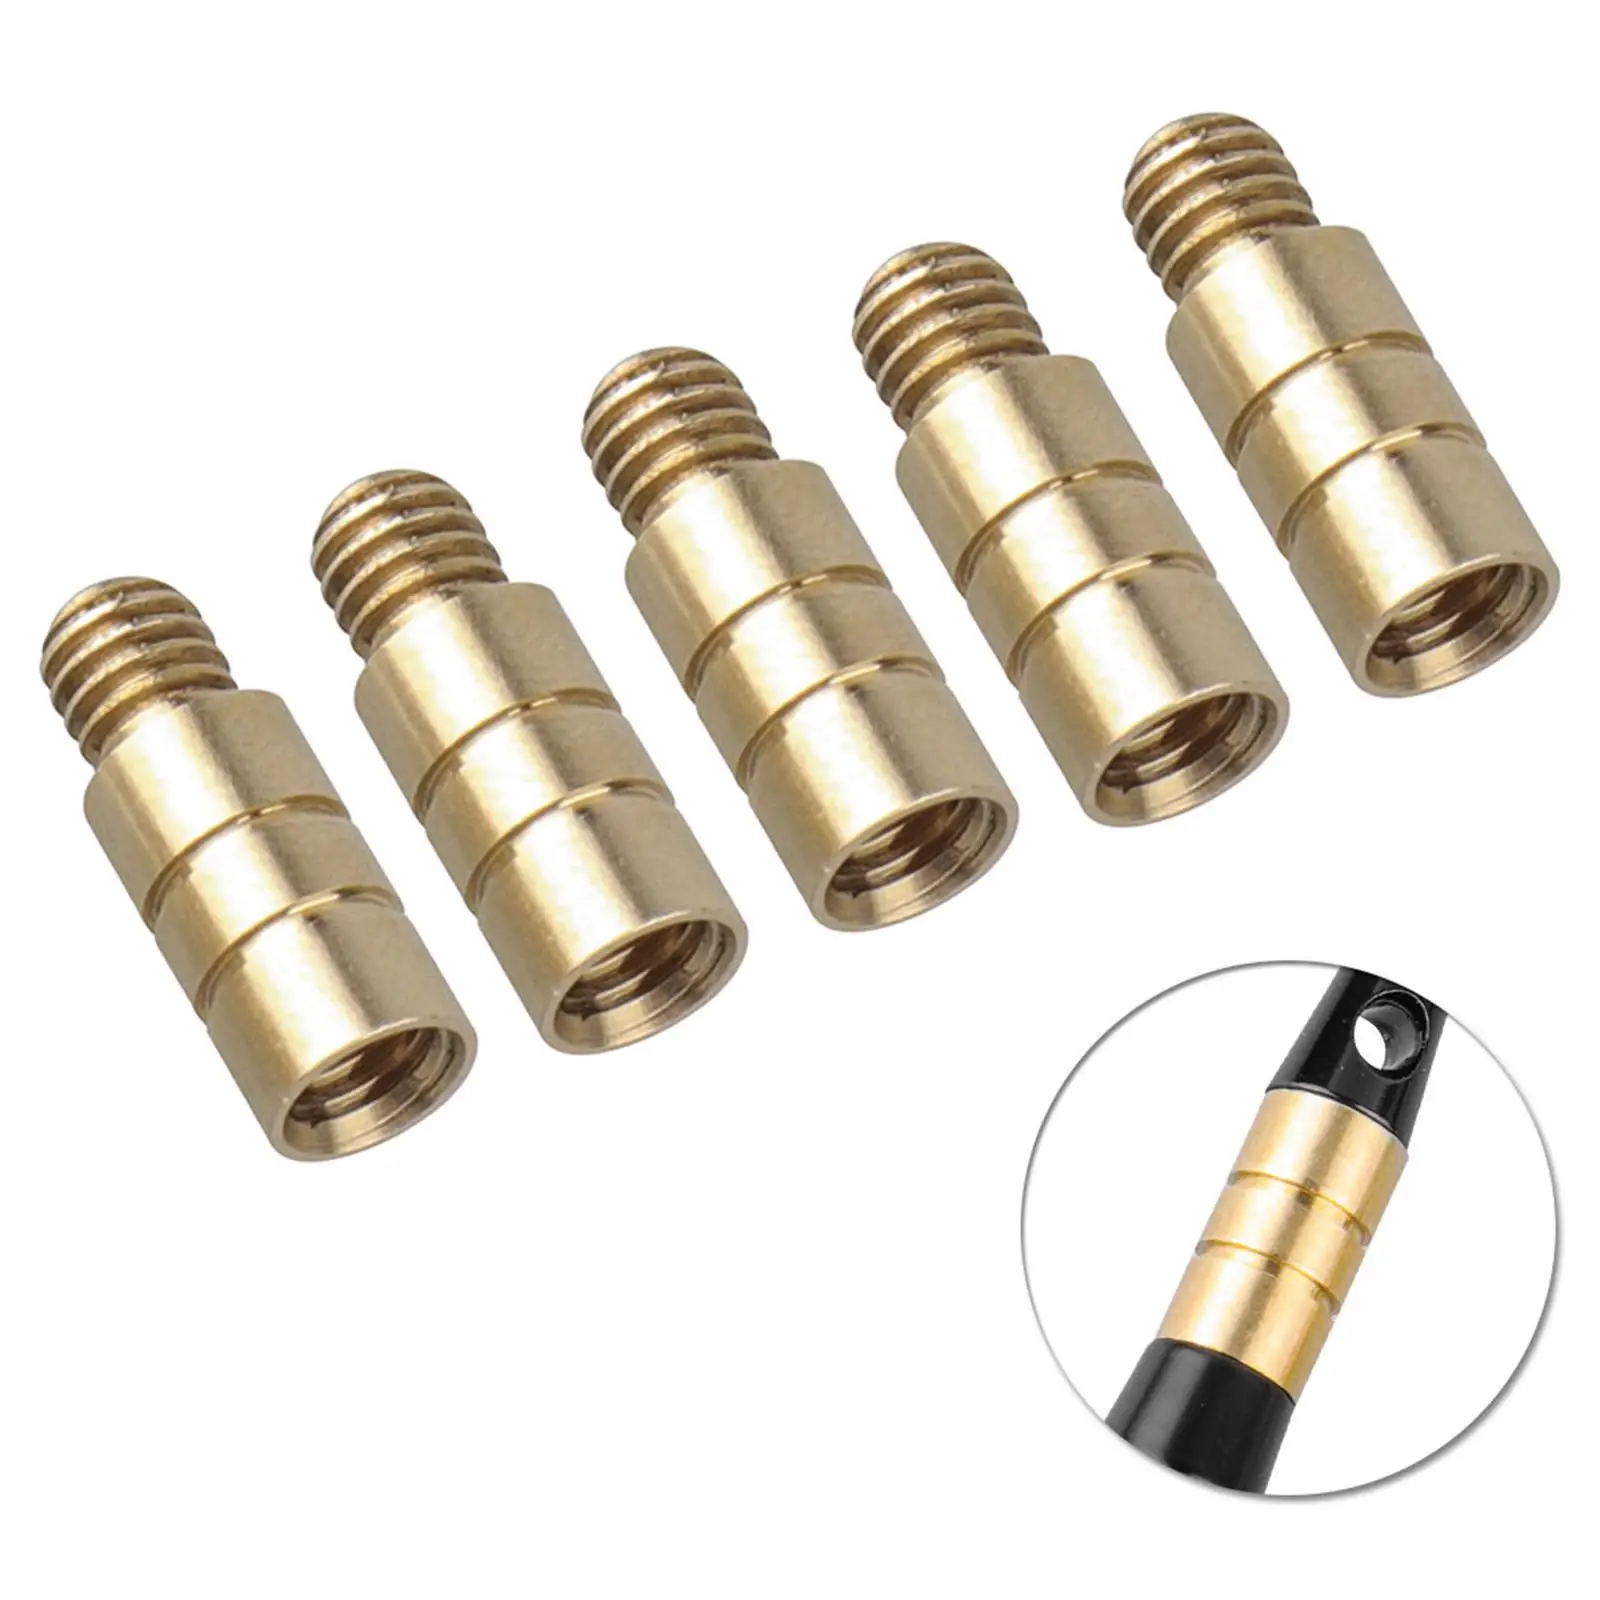 5Pcs Professional Darts Weights 2BA Pole Hardware Fittings Add for Soft and Steel Darts